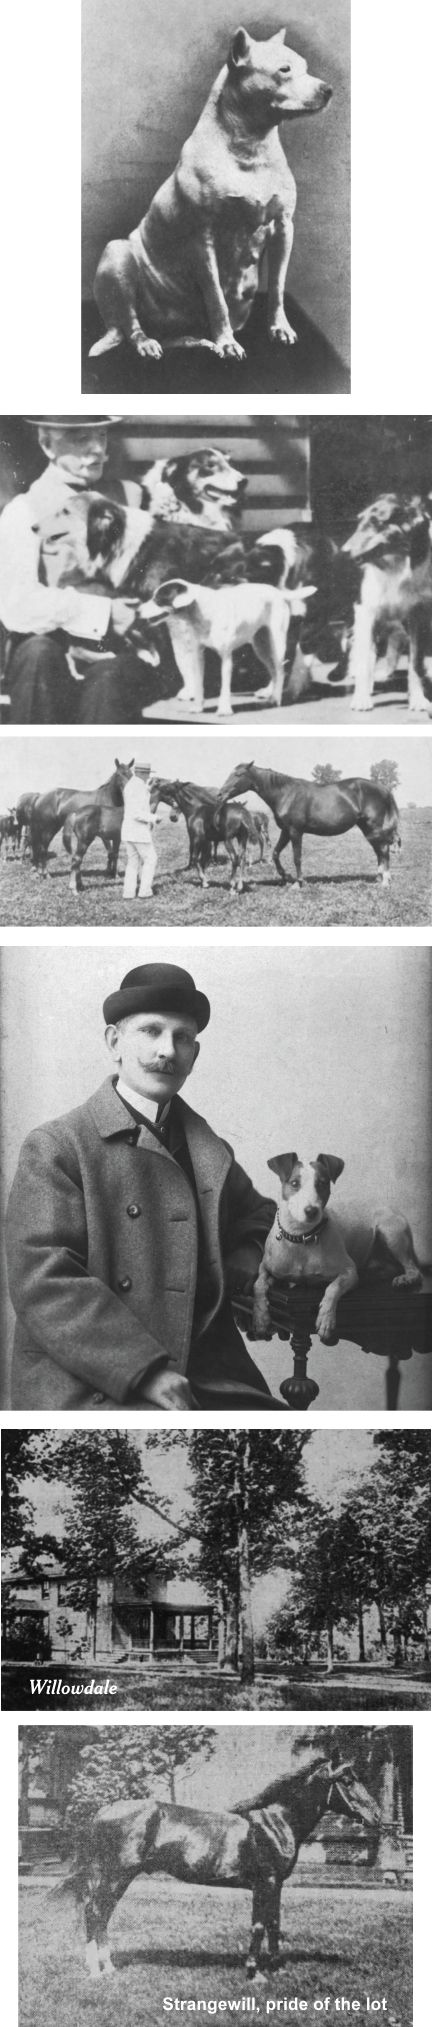 Will Davis and his dogs and horses